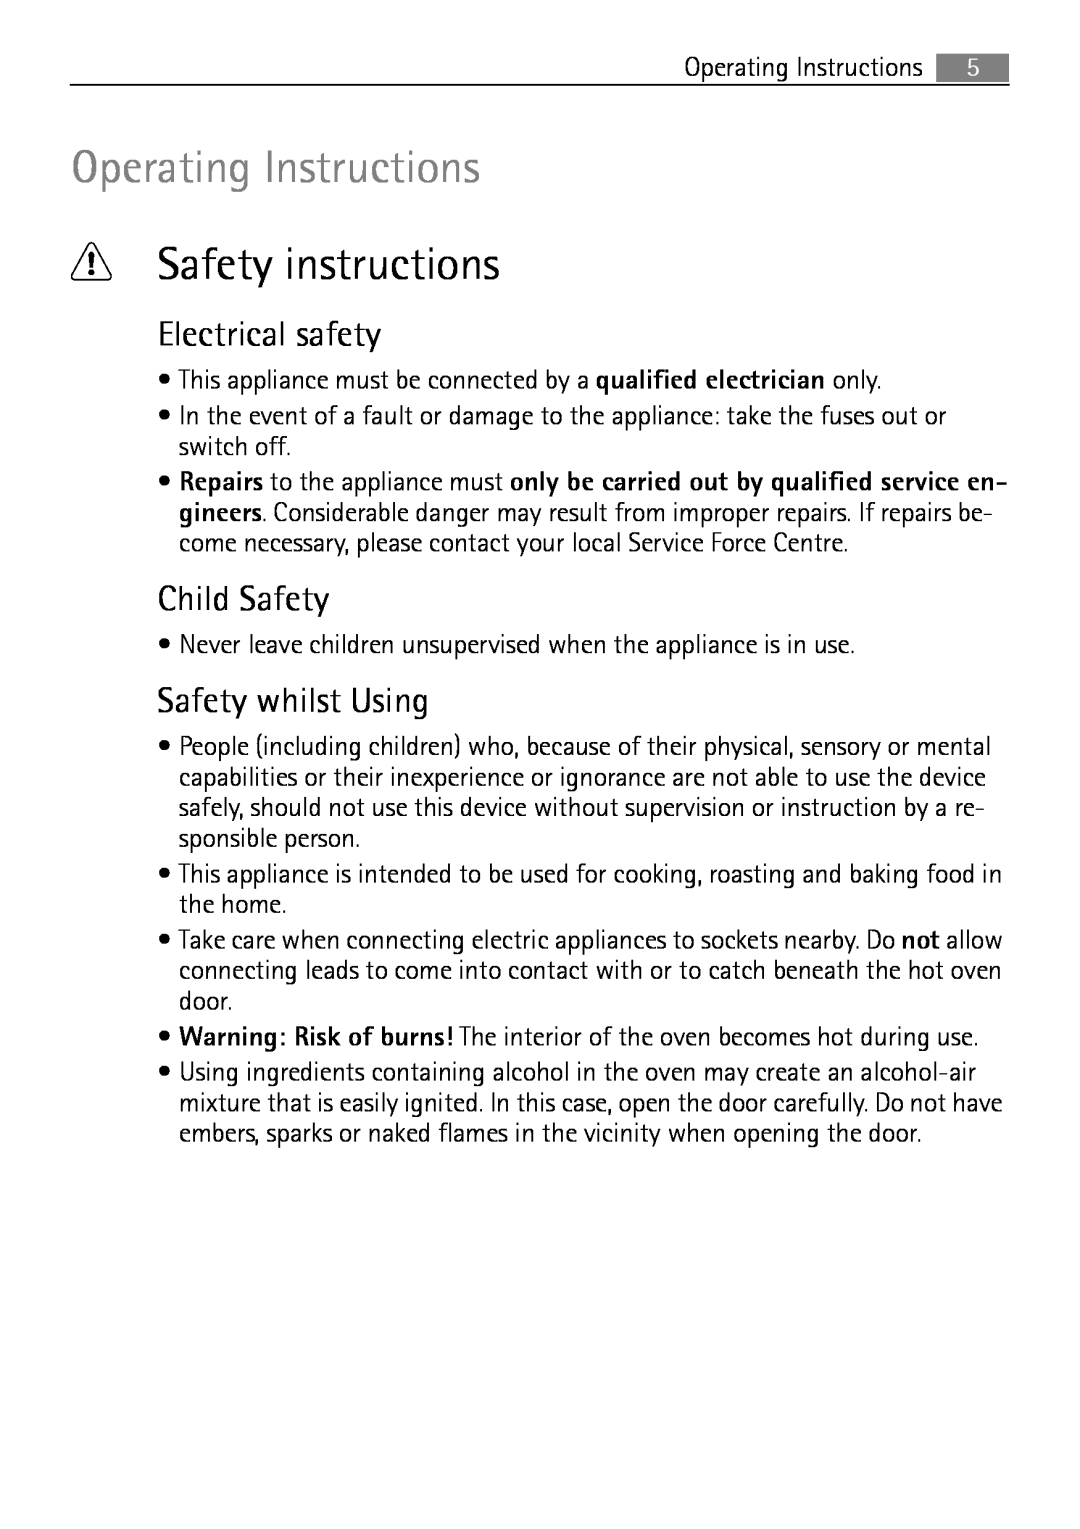 Electrolux B2100-5 Operating Instructions, Safety instructions, Electrical safety, Child Safety, Safety whilst Using 